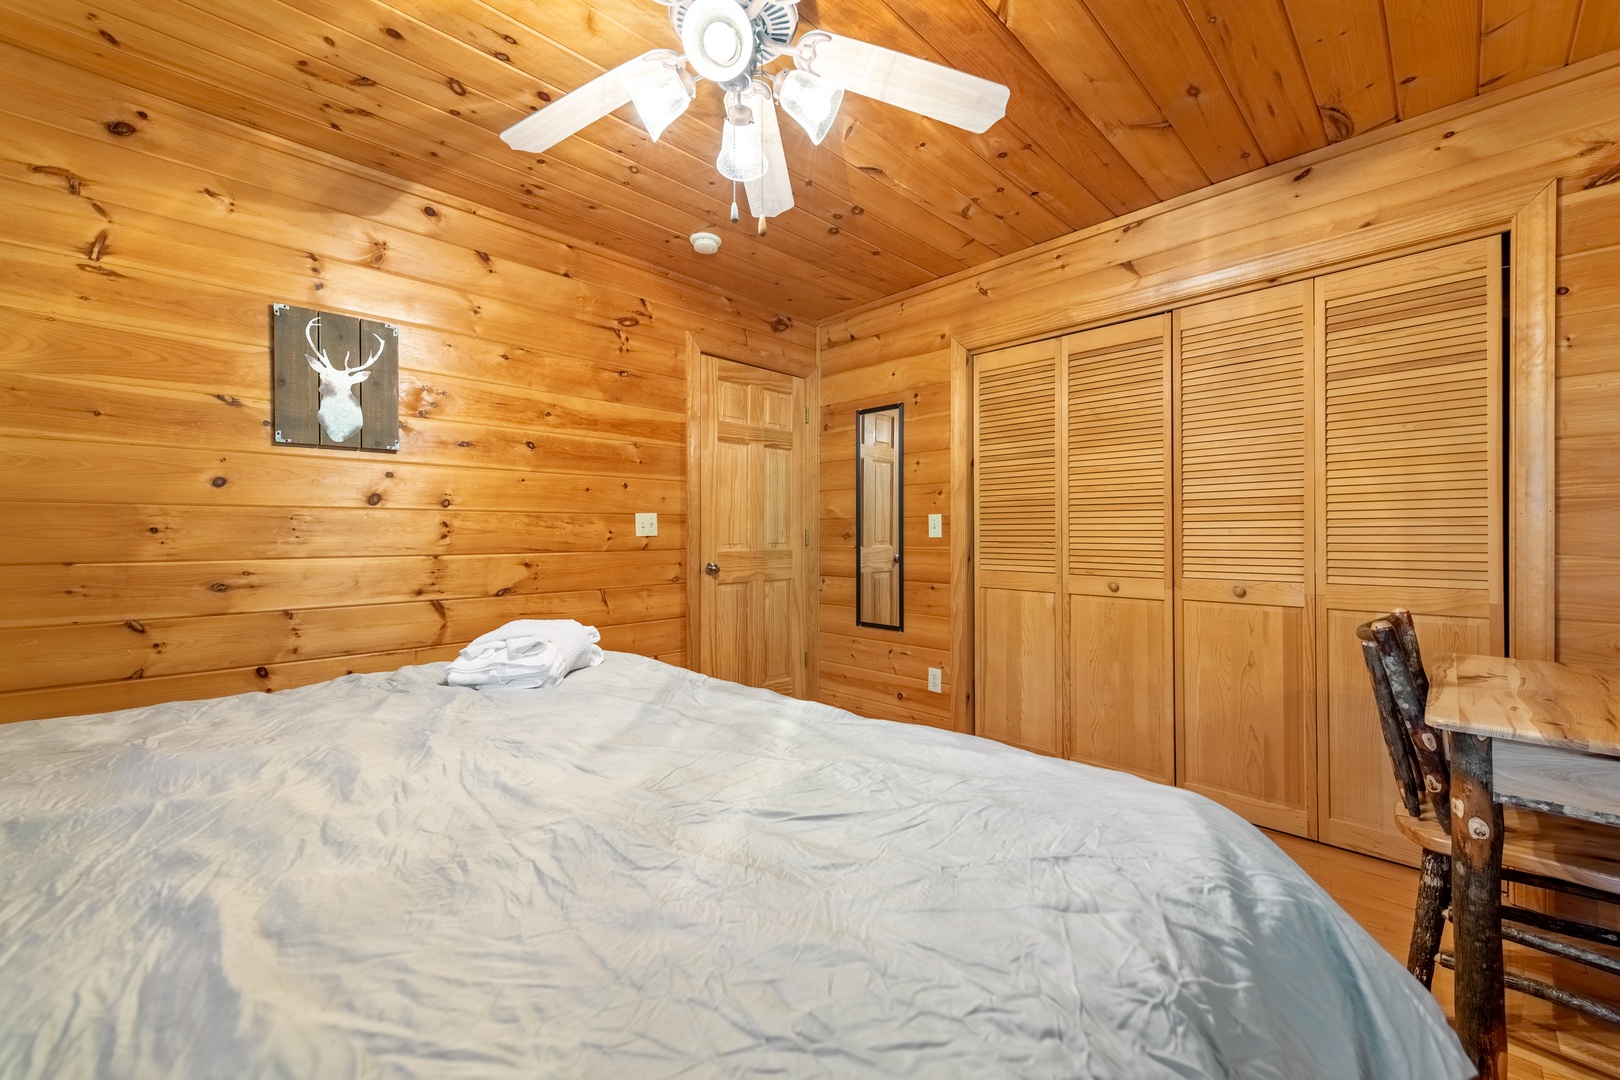 Sunset in the Mountains - Entry Level Guest Bedroom